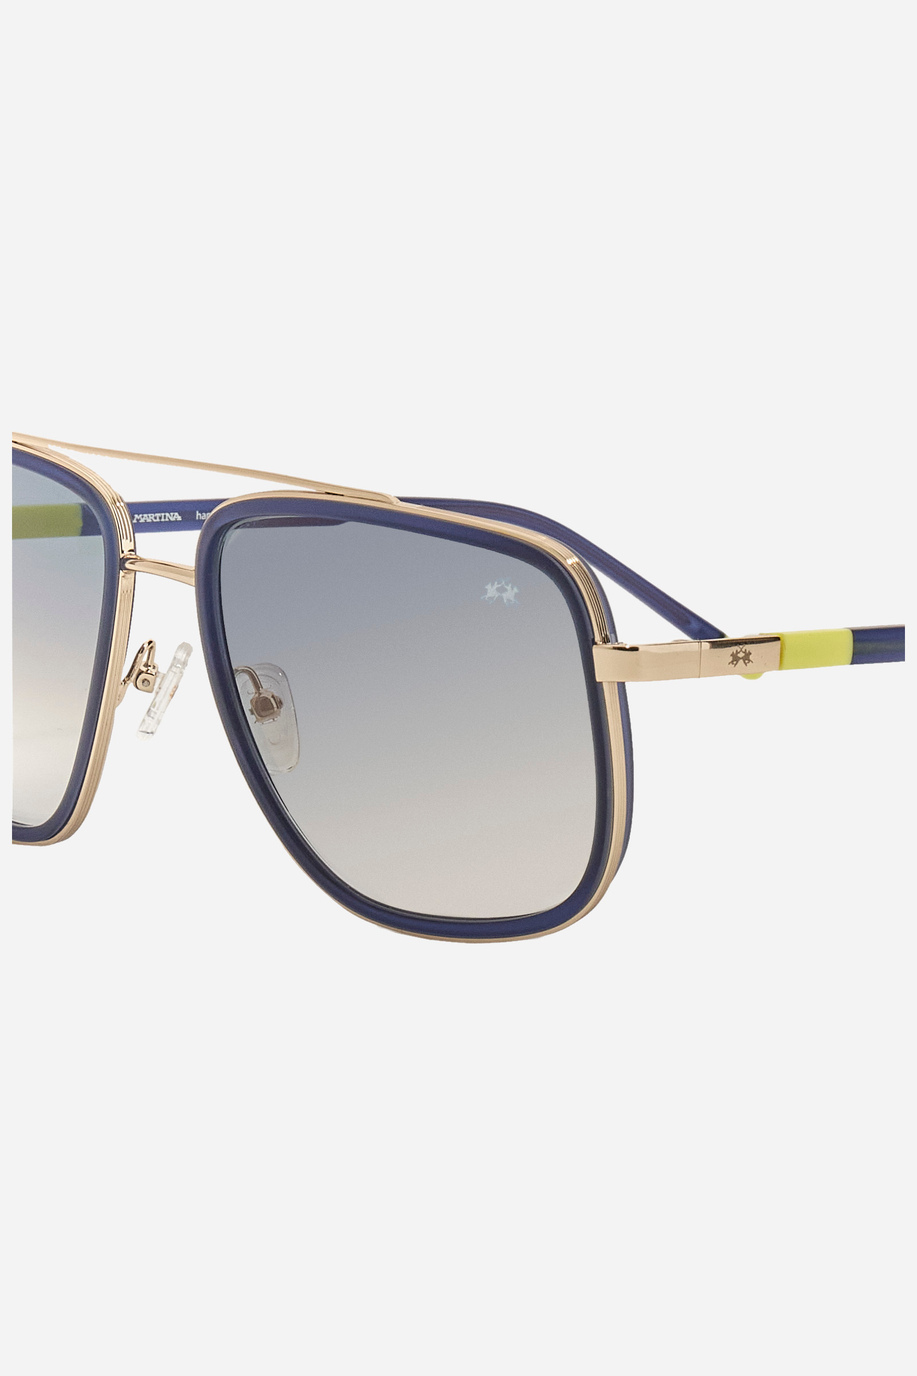 Metal sunglasses - Small gifts for him | La Martina - Official Online Shop